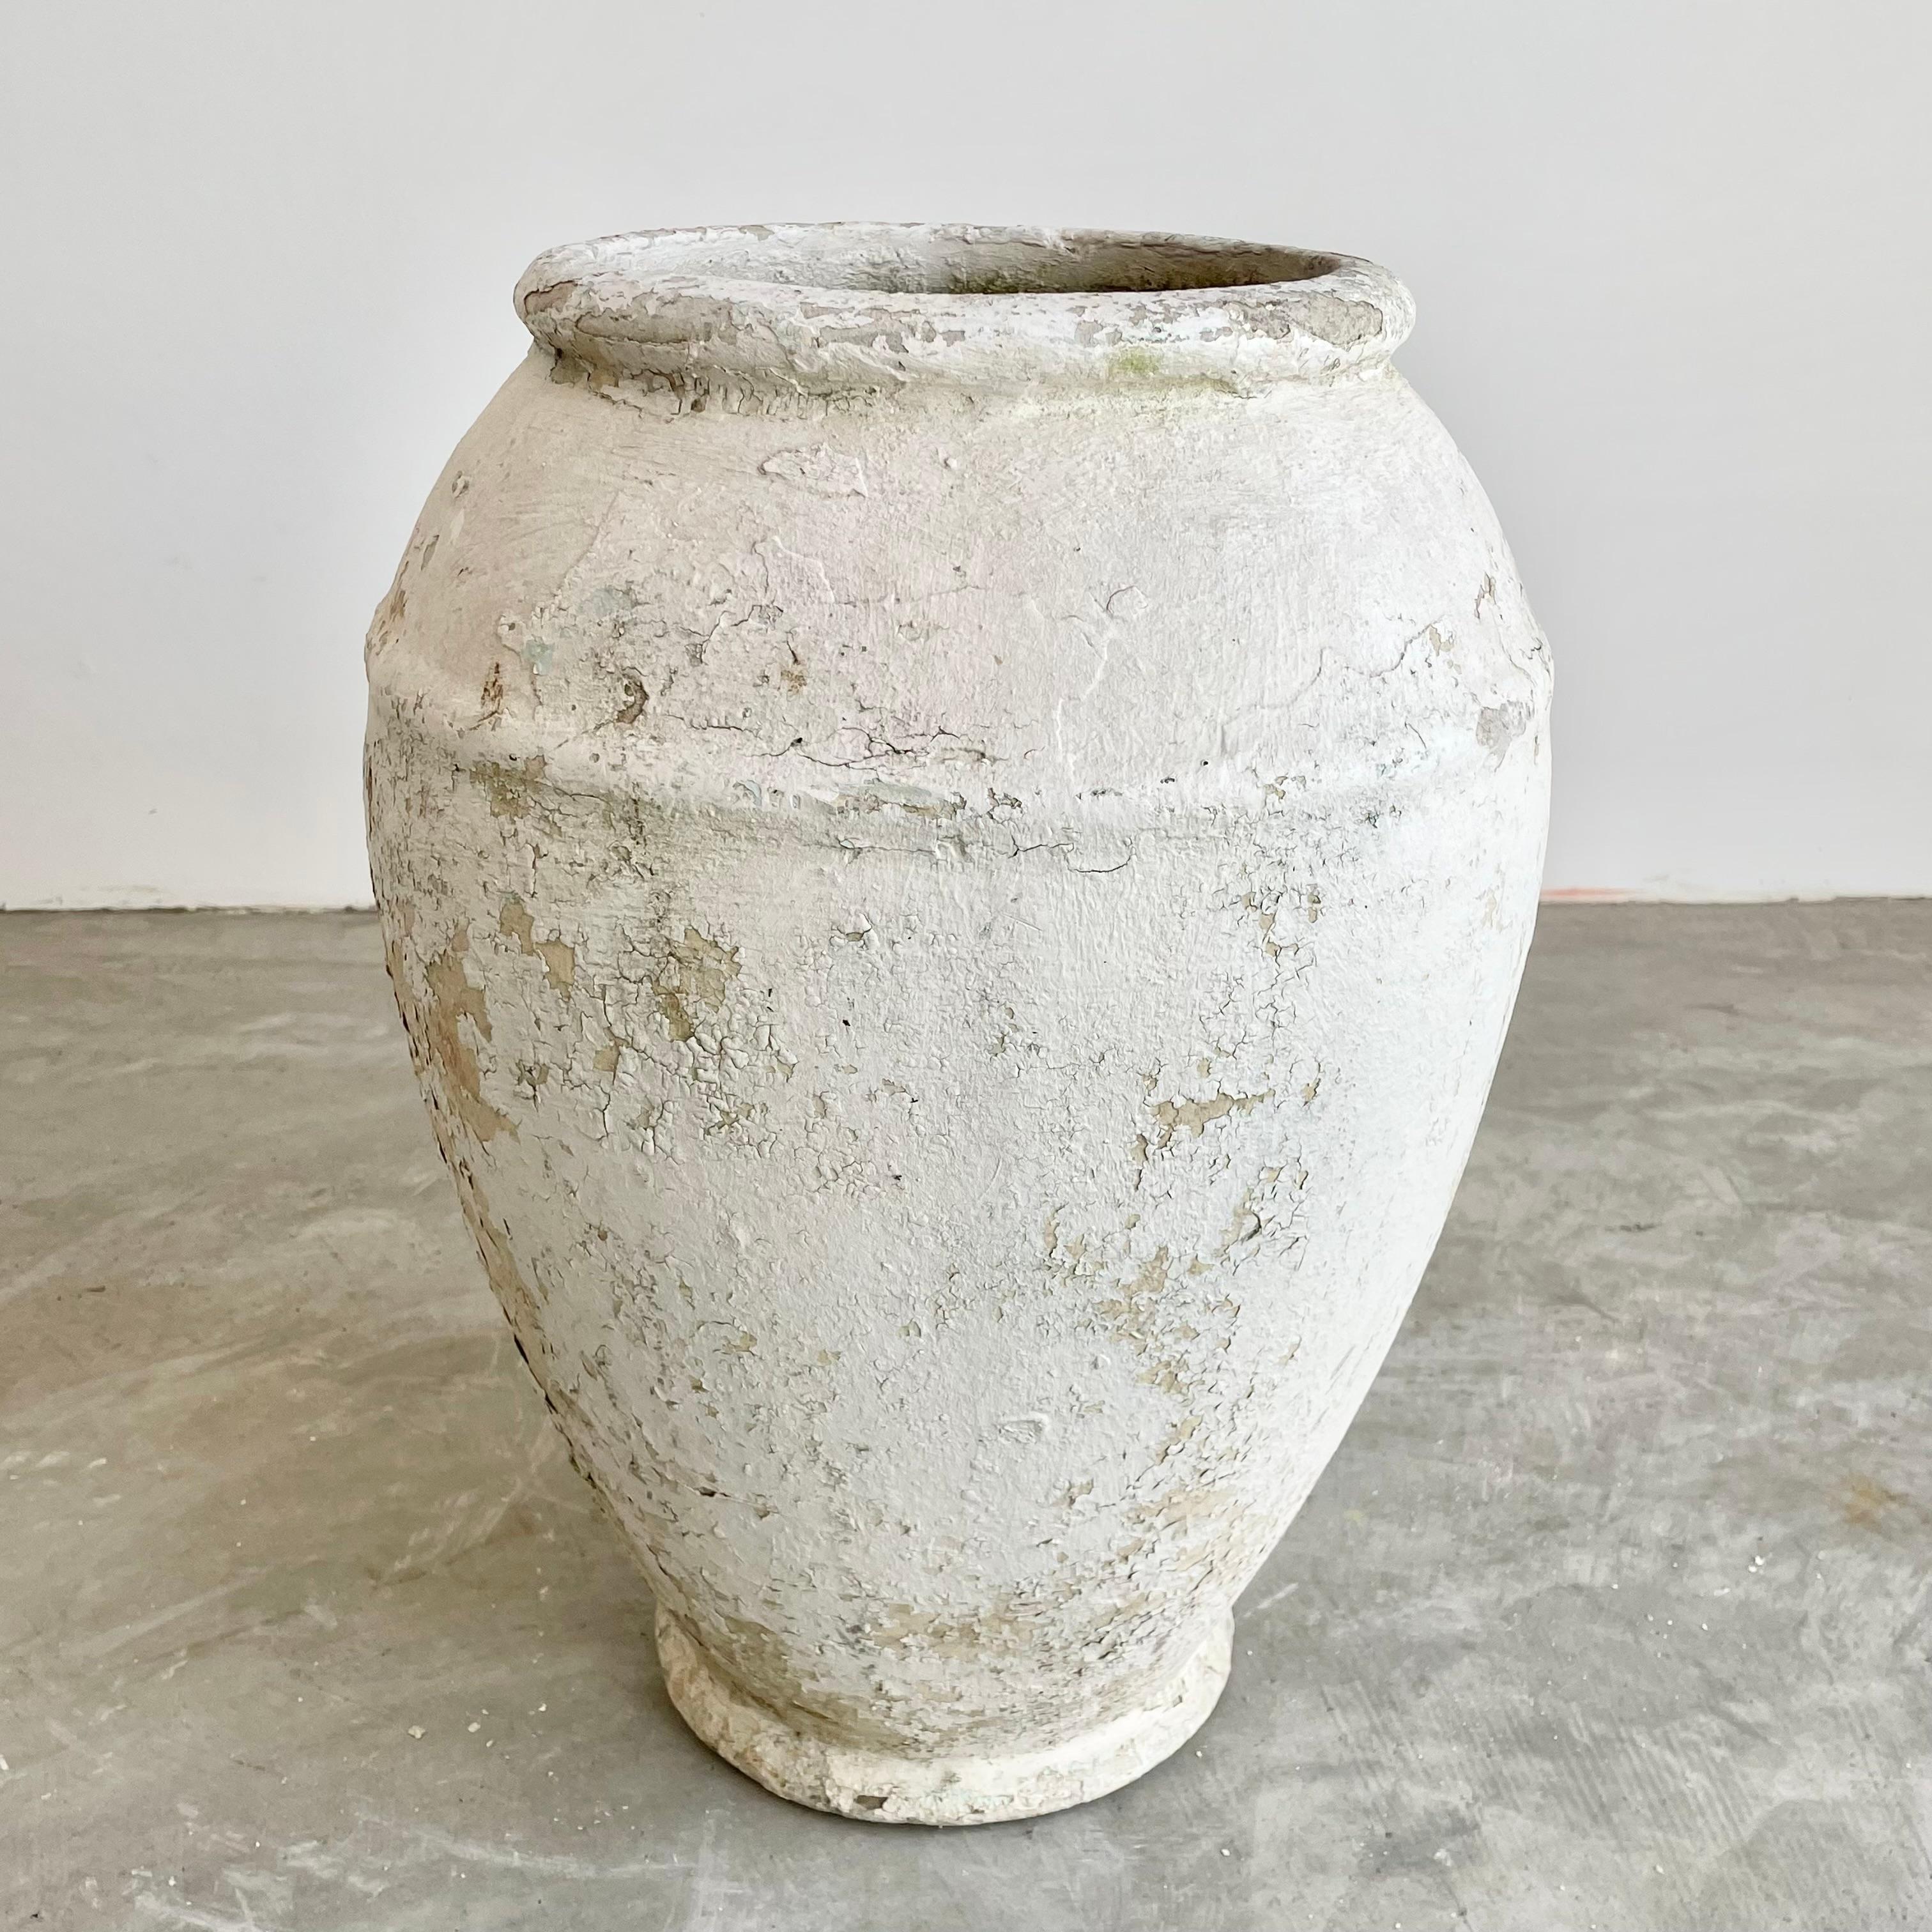 Concrete urn by Willy Guhl. Rare model. Excellent cream and grey patina. Urn has a delicate cement ridge around the mouth as well as around the widest part of the jar giving it depth and delicate lines. The body of the jar tapers down to the bottom